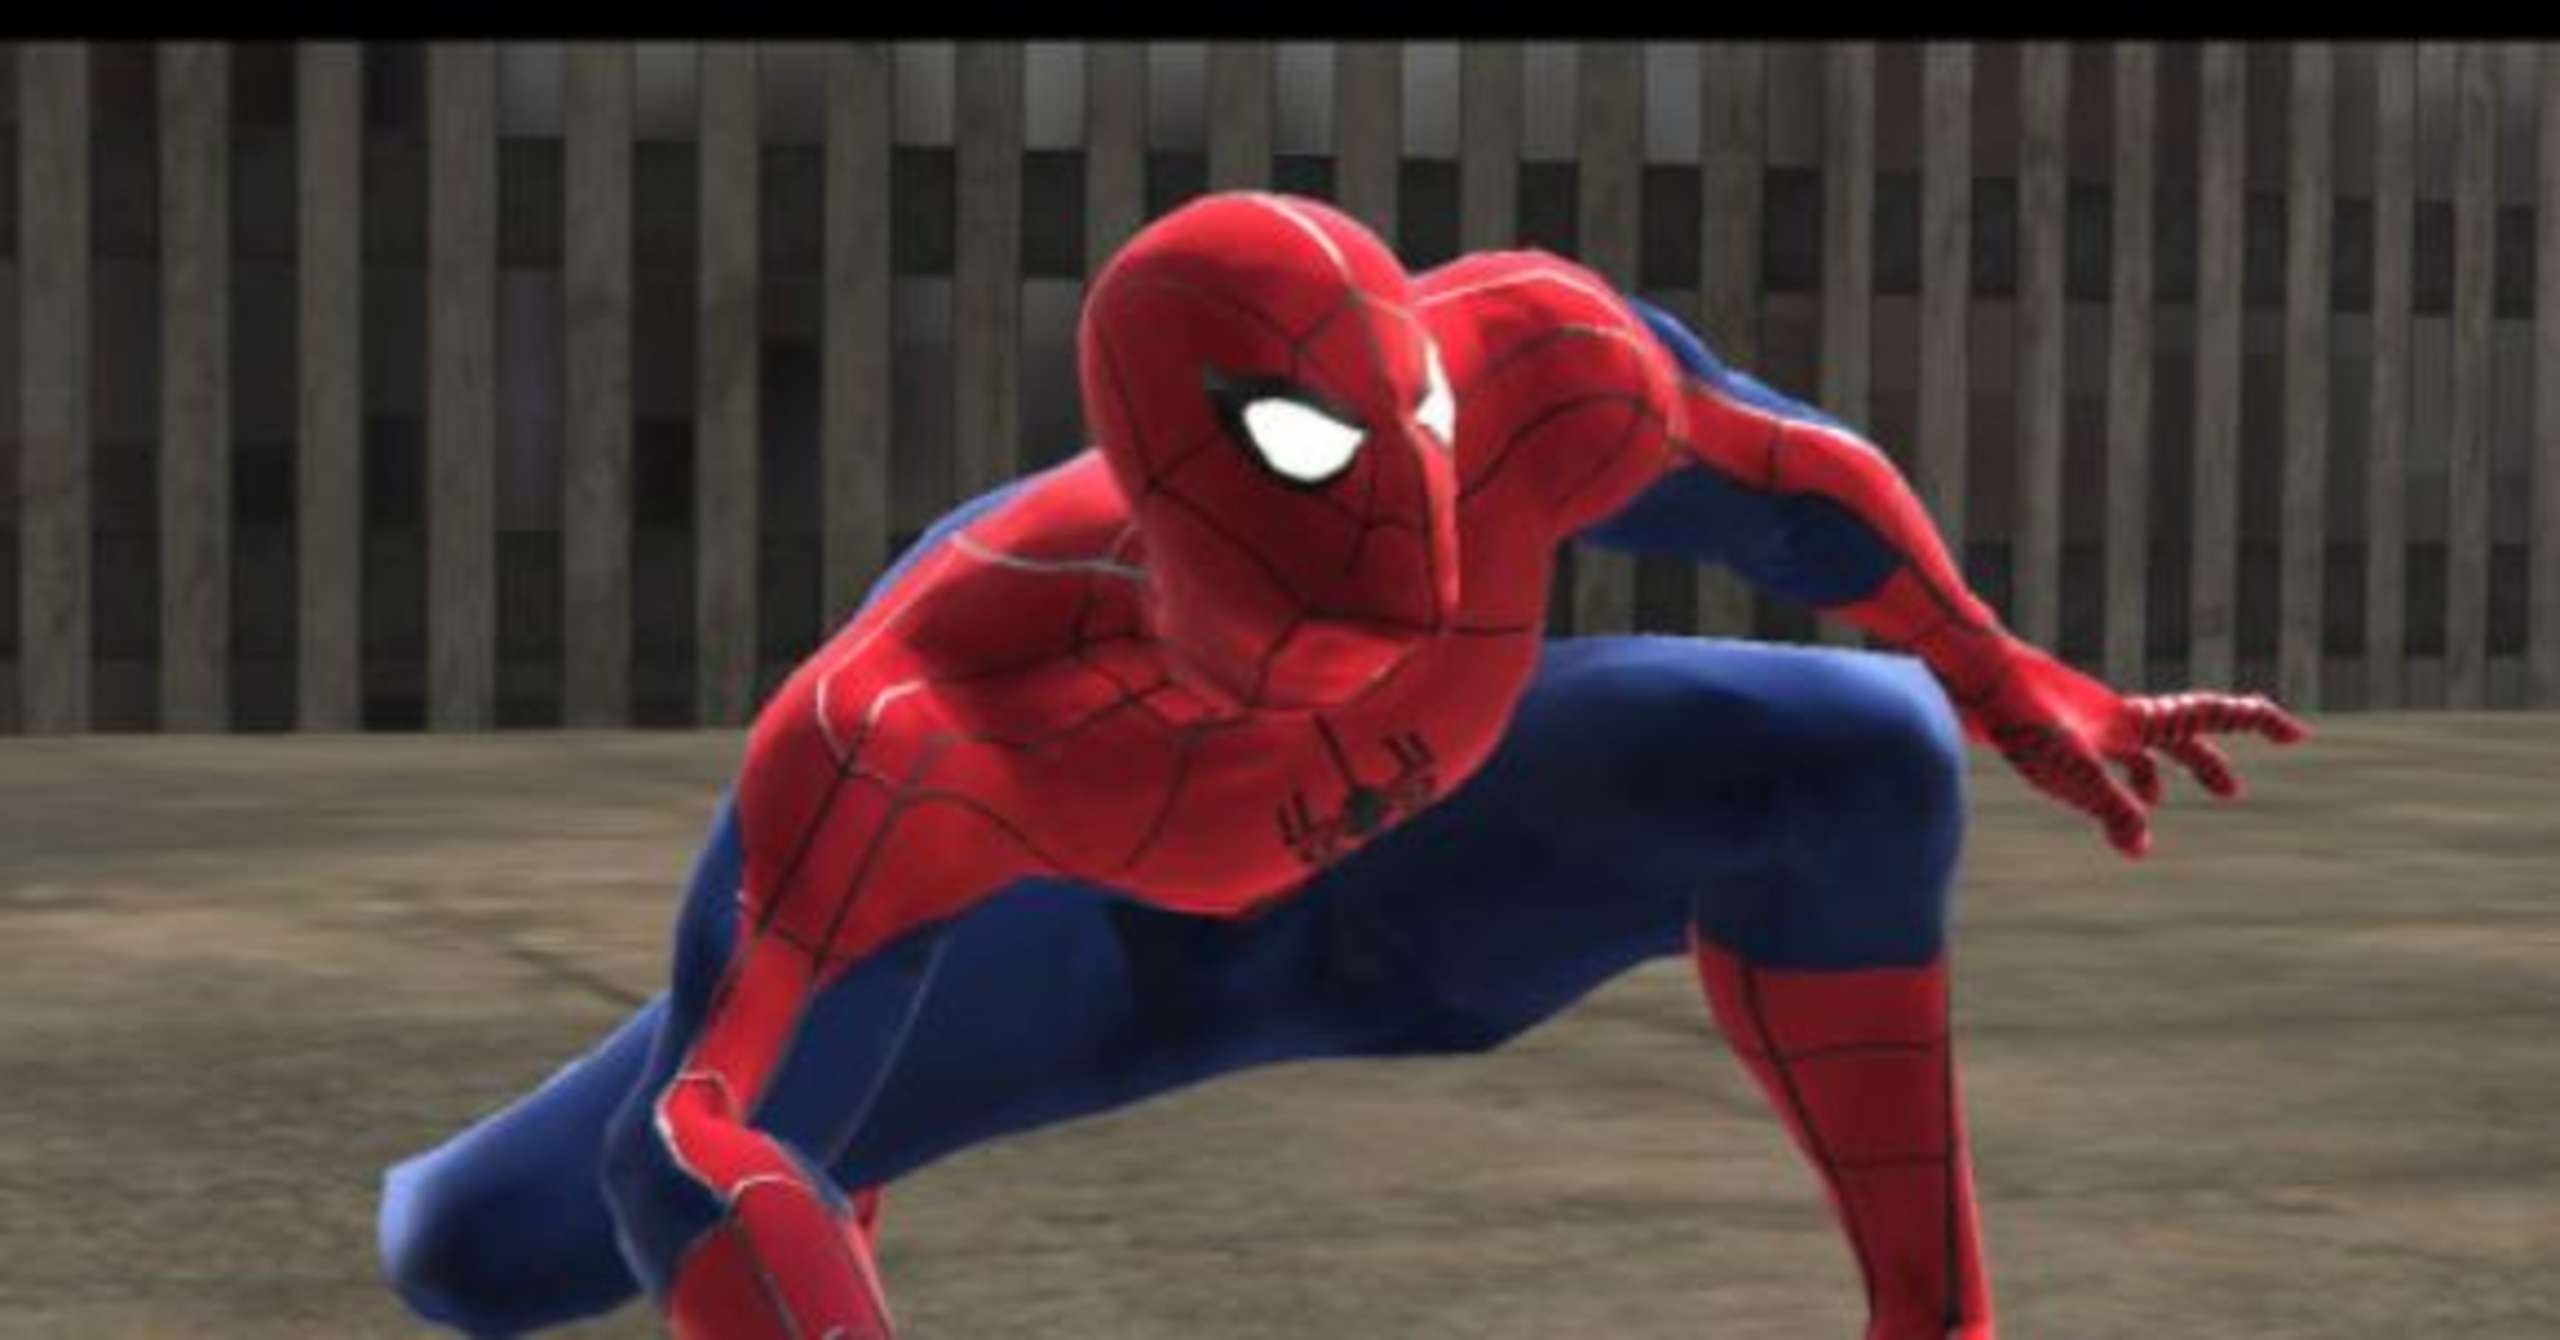 One Of The Most Beloved Animated Series About The Wall Crawler Receives So Much Love In Marvel’s Spider-Man Thanks To A Mod That Adds The Spectacular Suit